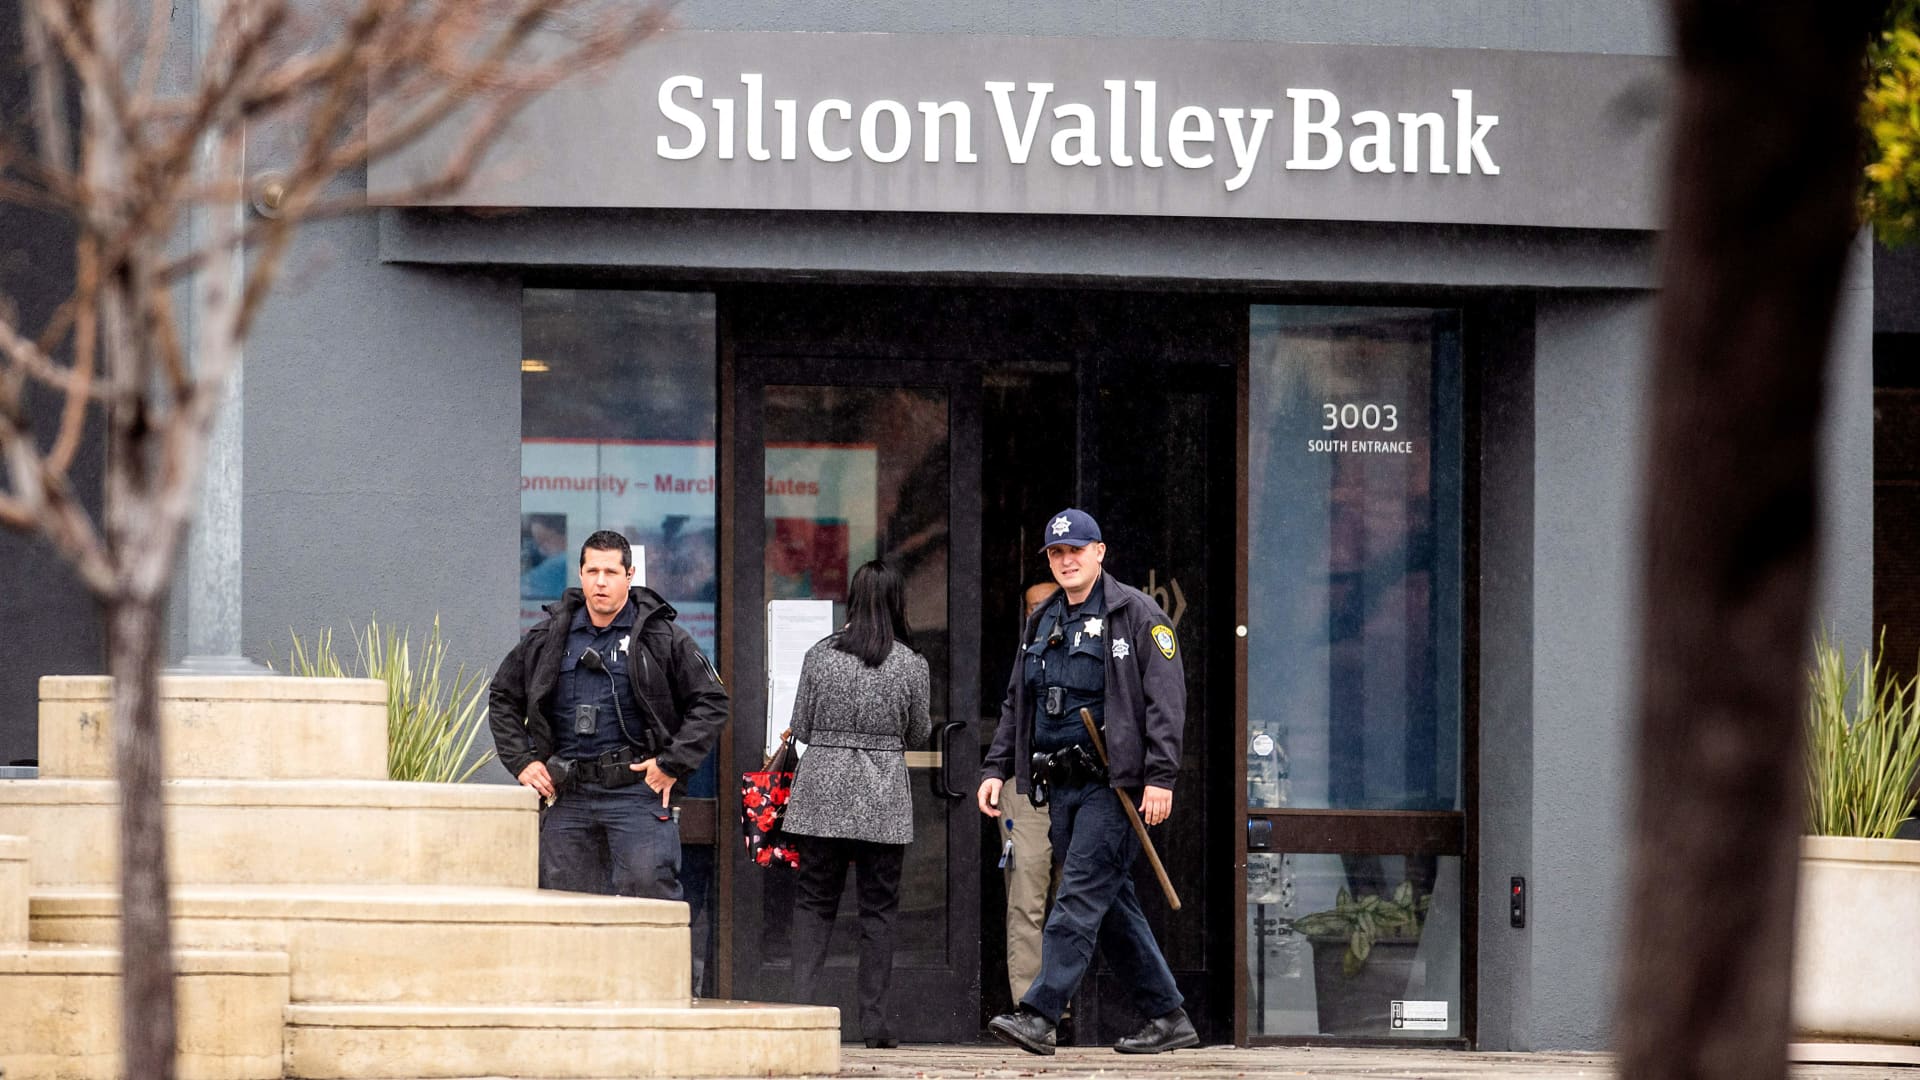 Silicon Valley Bank employees received bonuses hours before government takeover